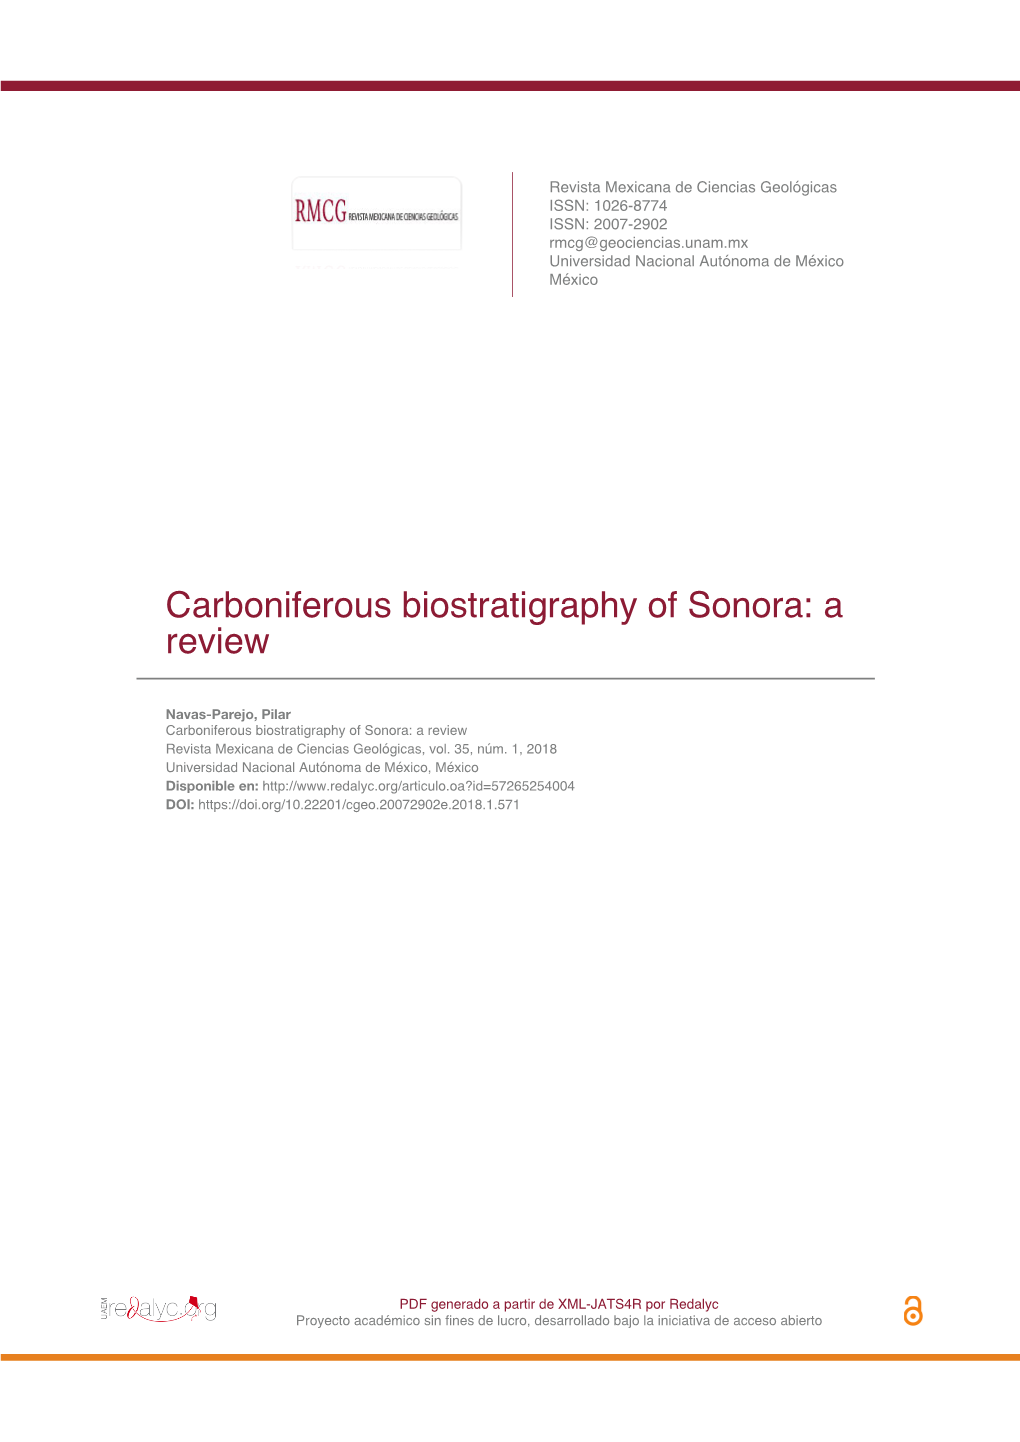 Carboniferous Biostratigraphy of Sonora: a Review